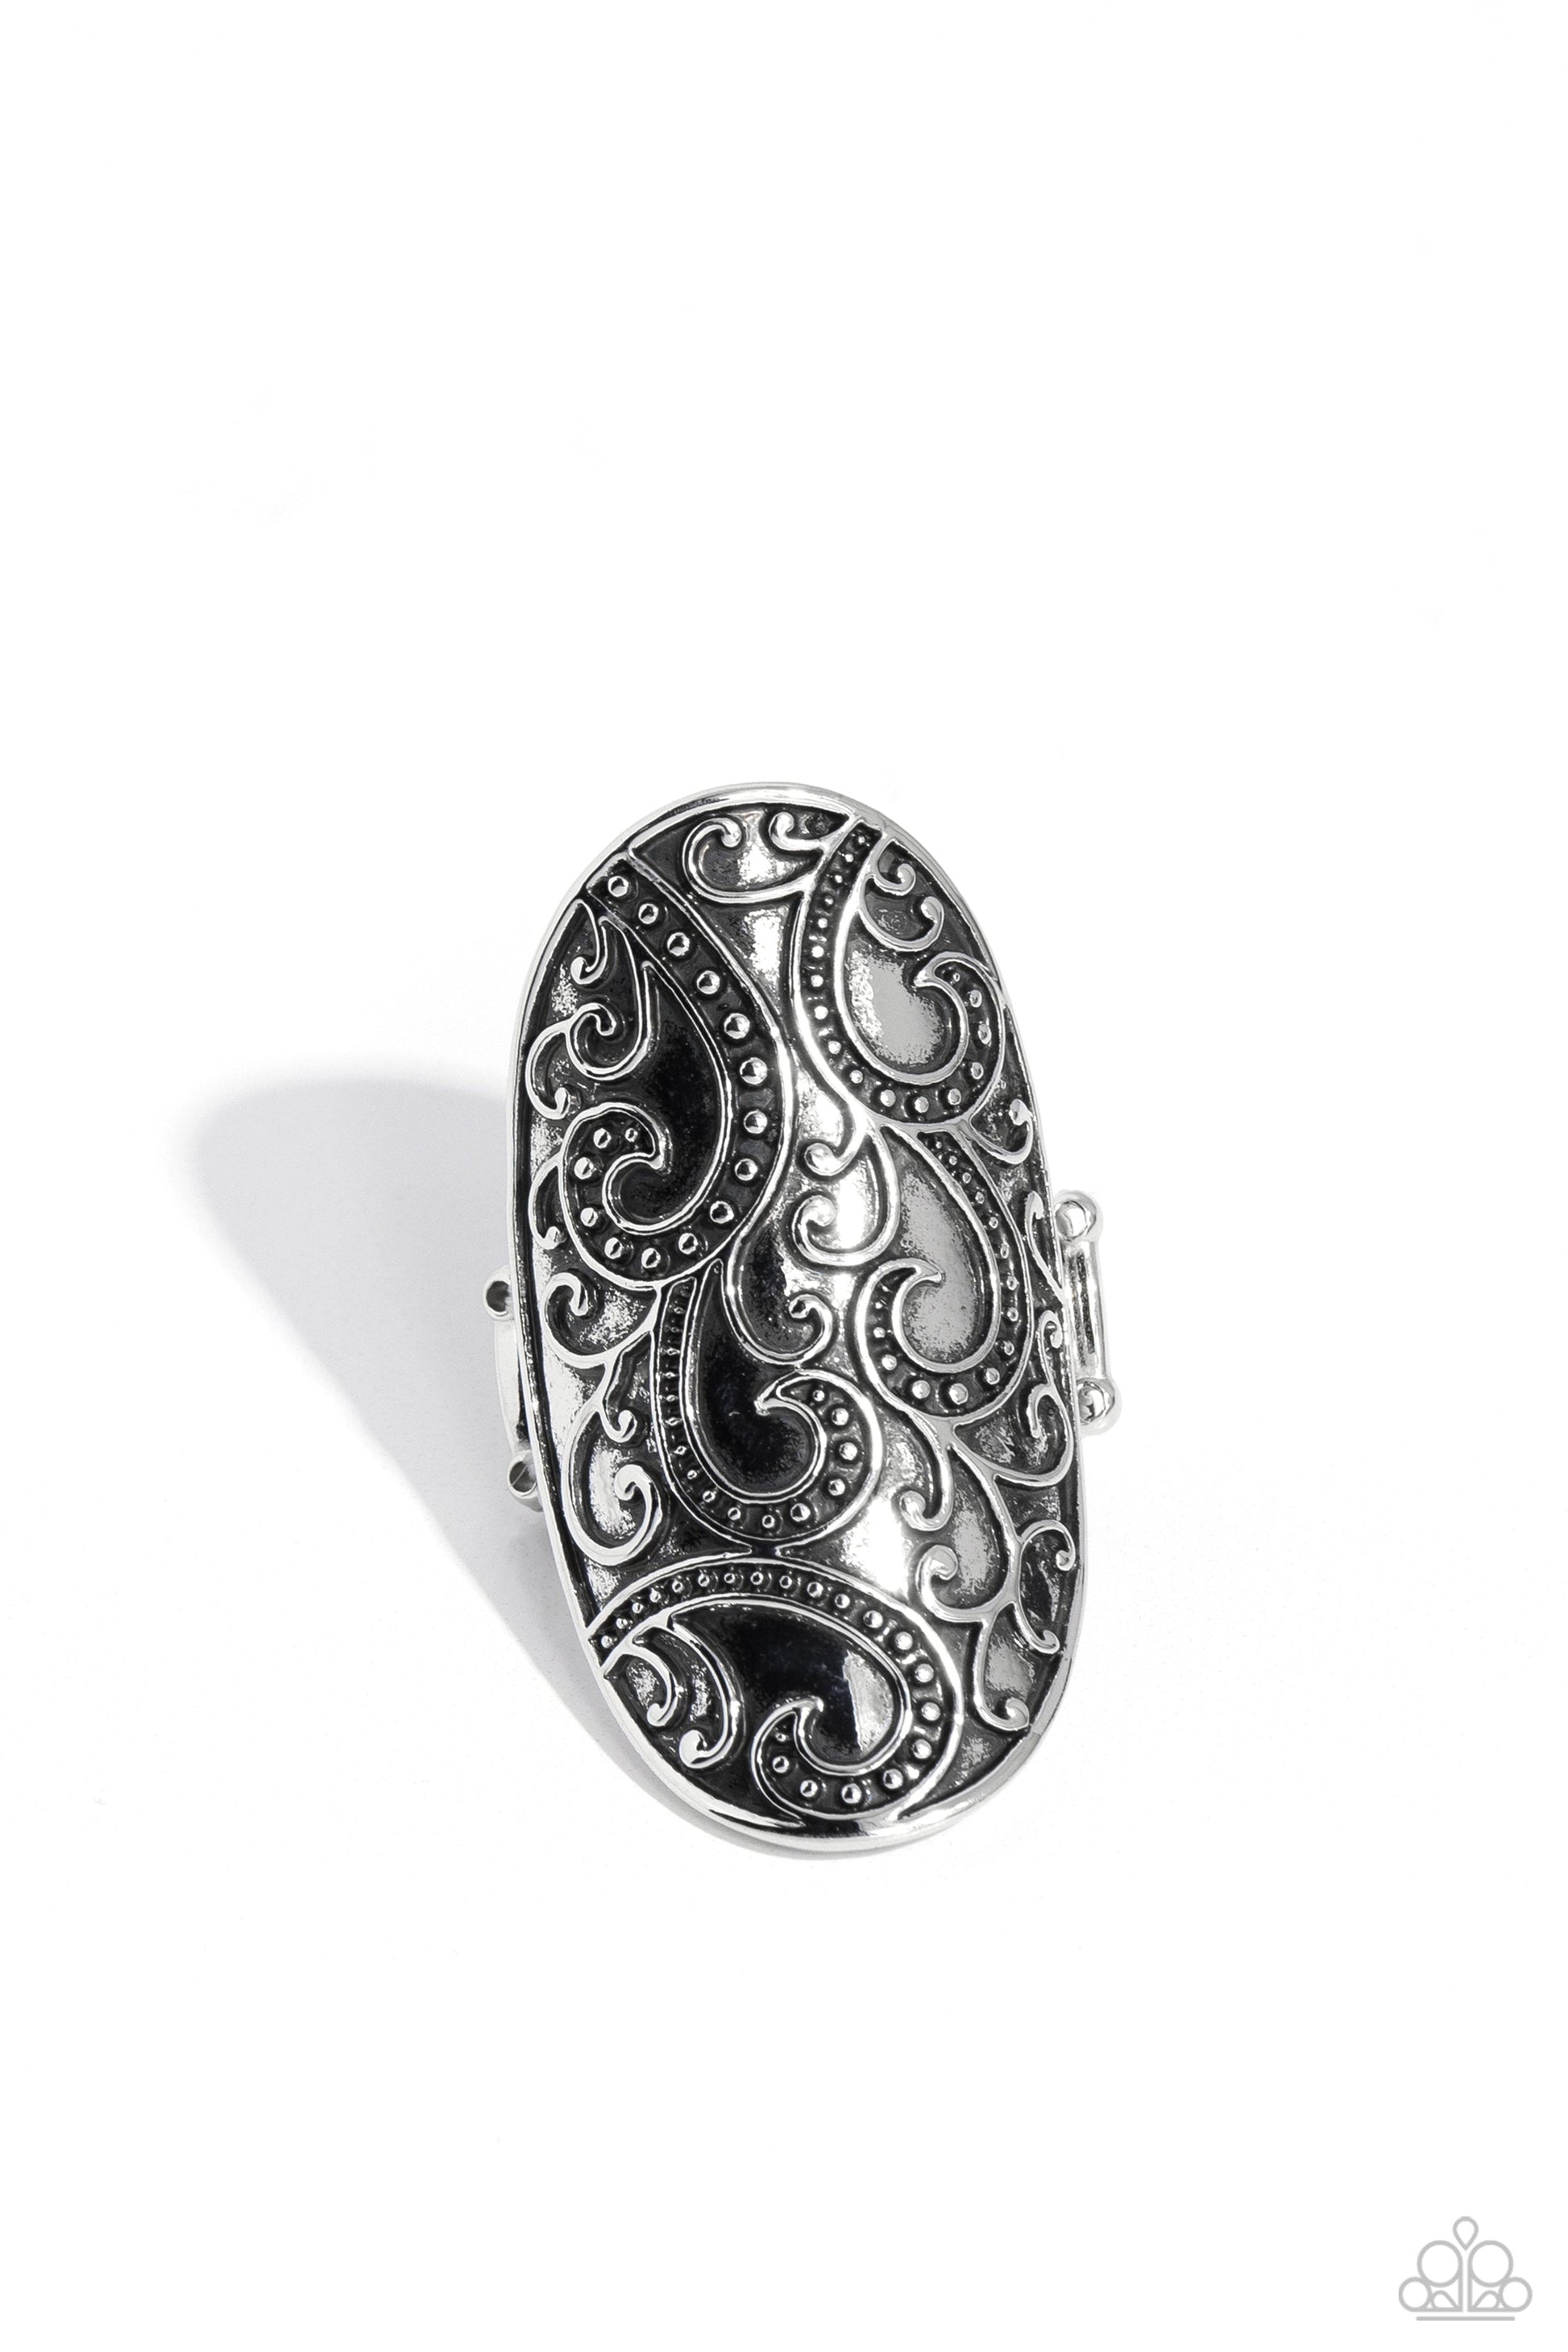 PAISLEY for You - Silver Fashion Ring - Paparazzi Accessories - Embossed in a studded paisley pattern, a thick antiqued silver frame folds around the finger for a whimsically vintage look.